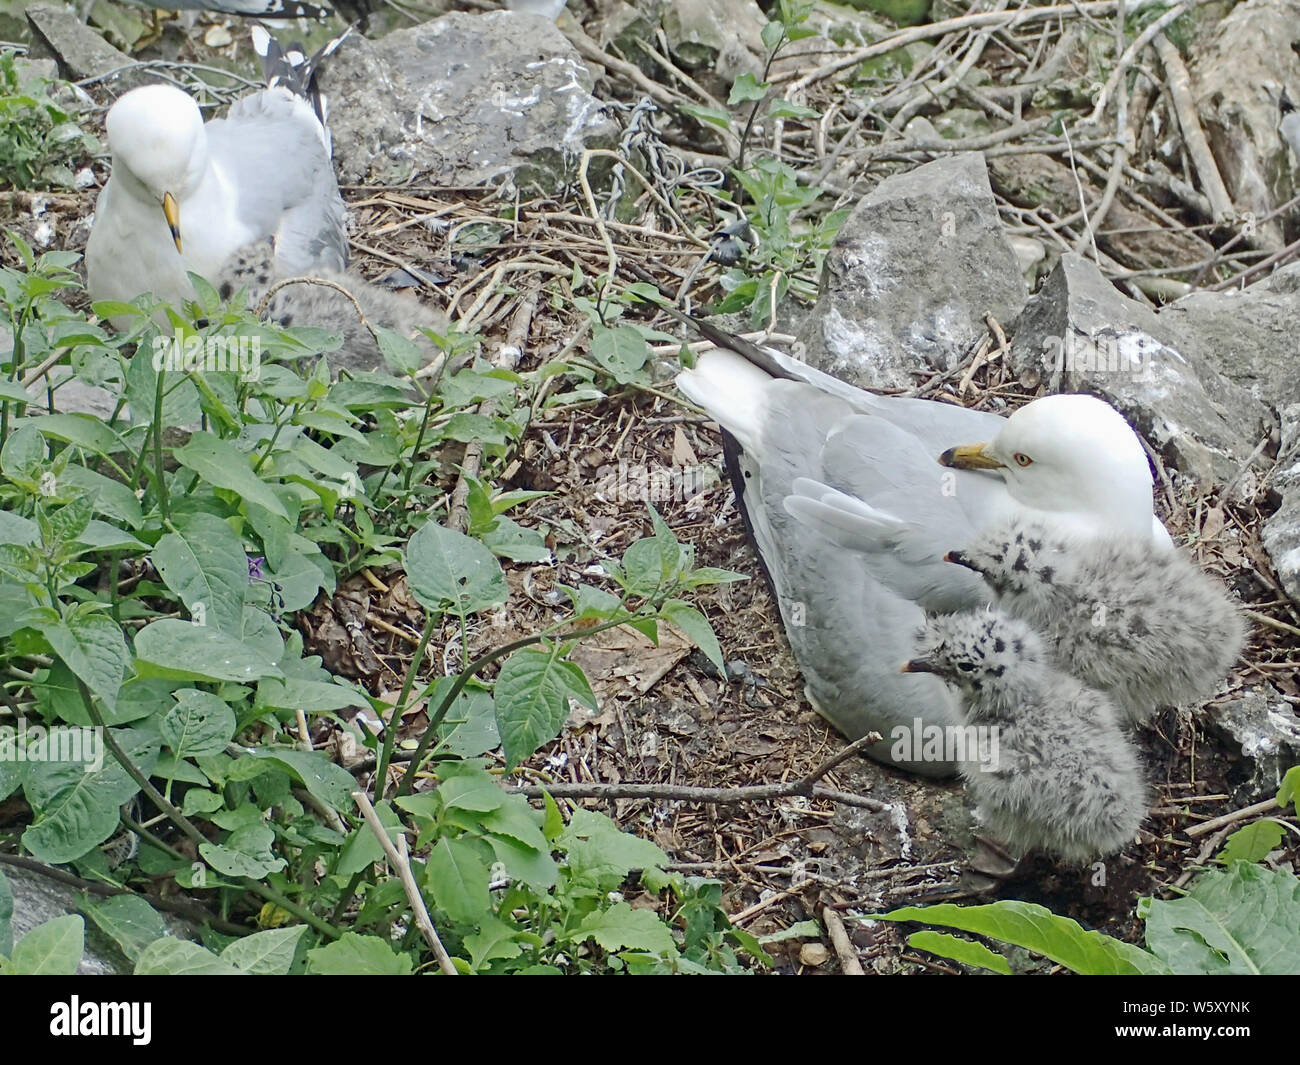 Two grey and white ring-billed seagulls with bright red eye and yellow beak, nesting fluffy black spotted gull chicks. Stock Photo